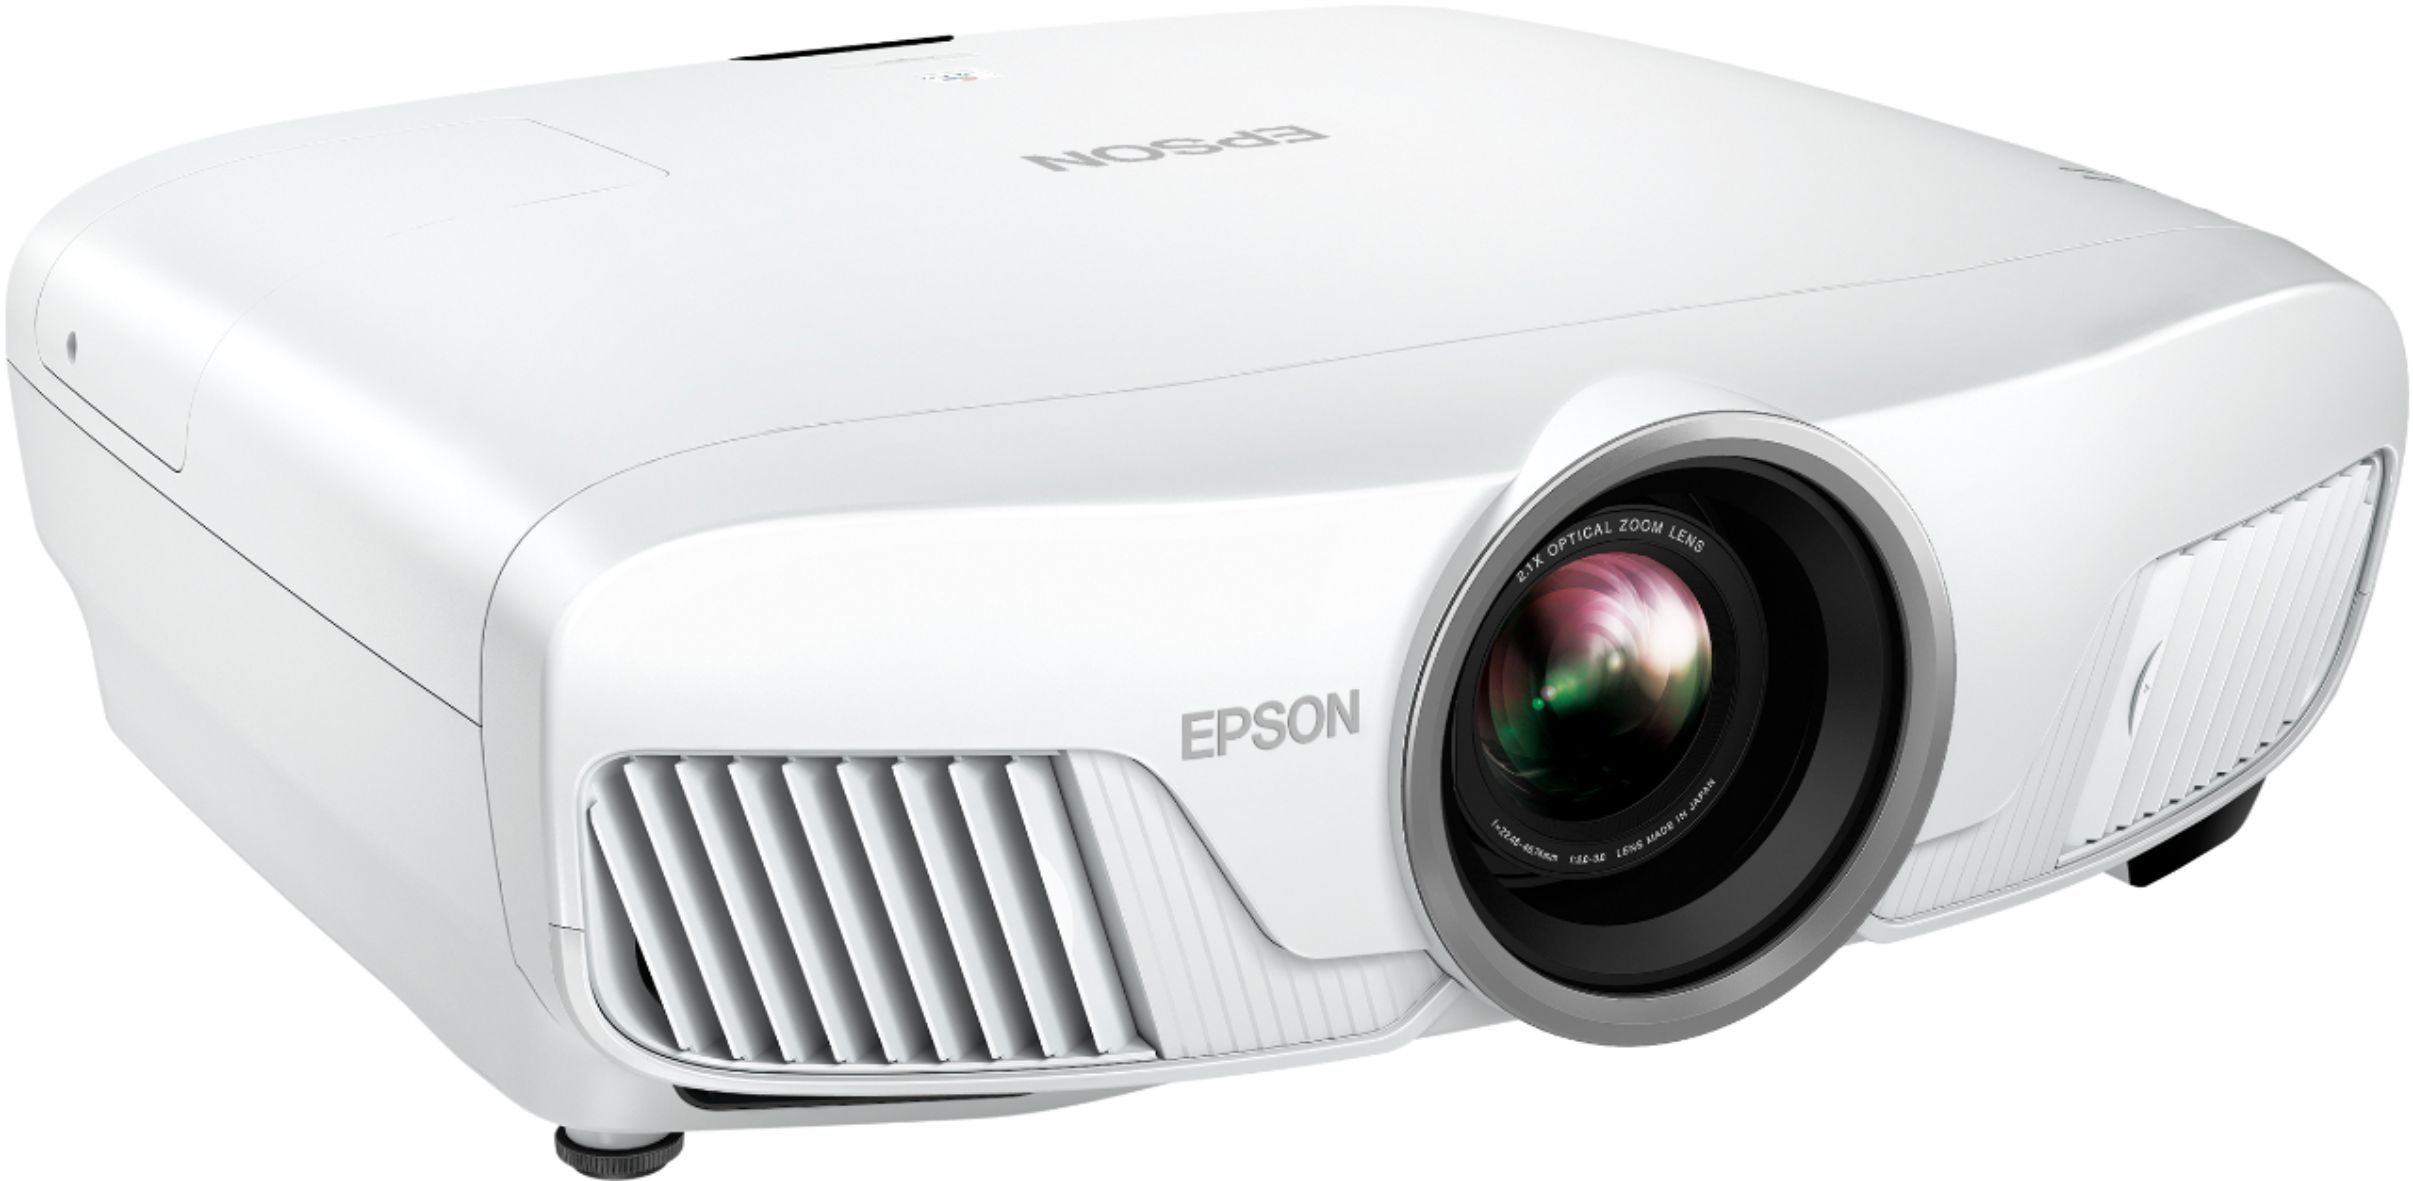 Angle View: Epson - Home Cinema 880 1080p 3LCD Projector, 3300 lumens - White